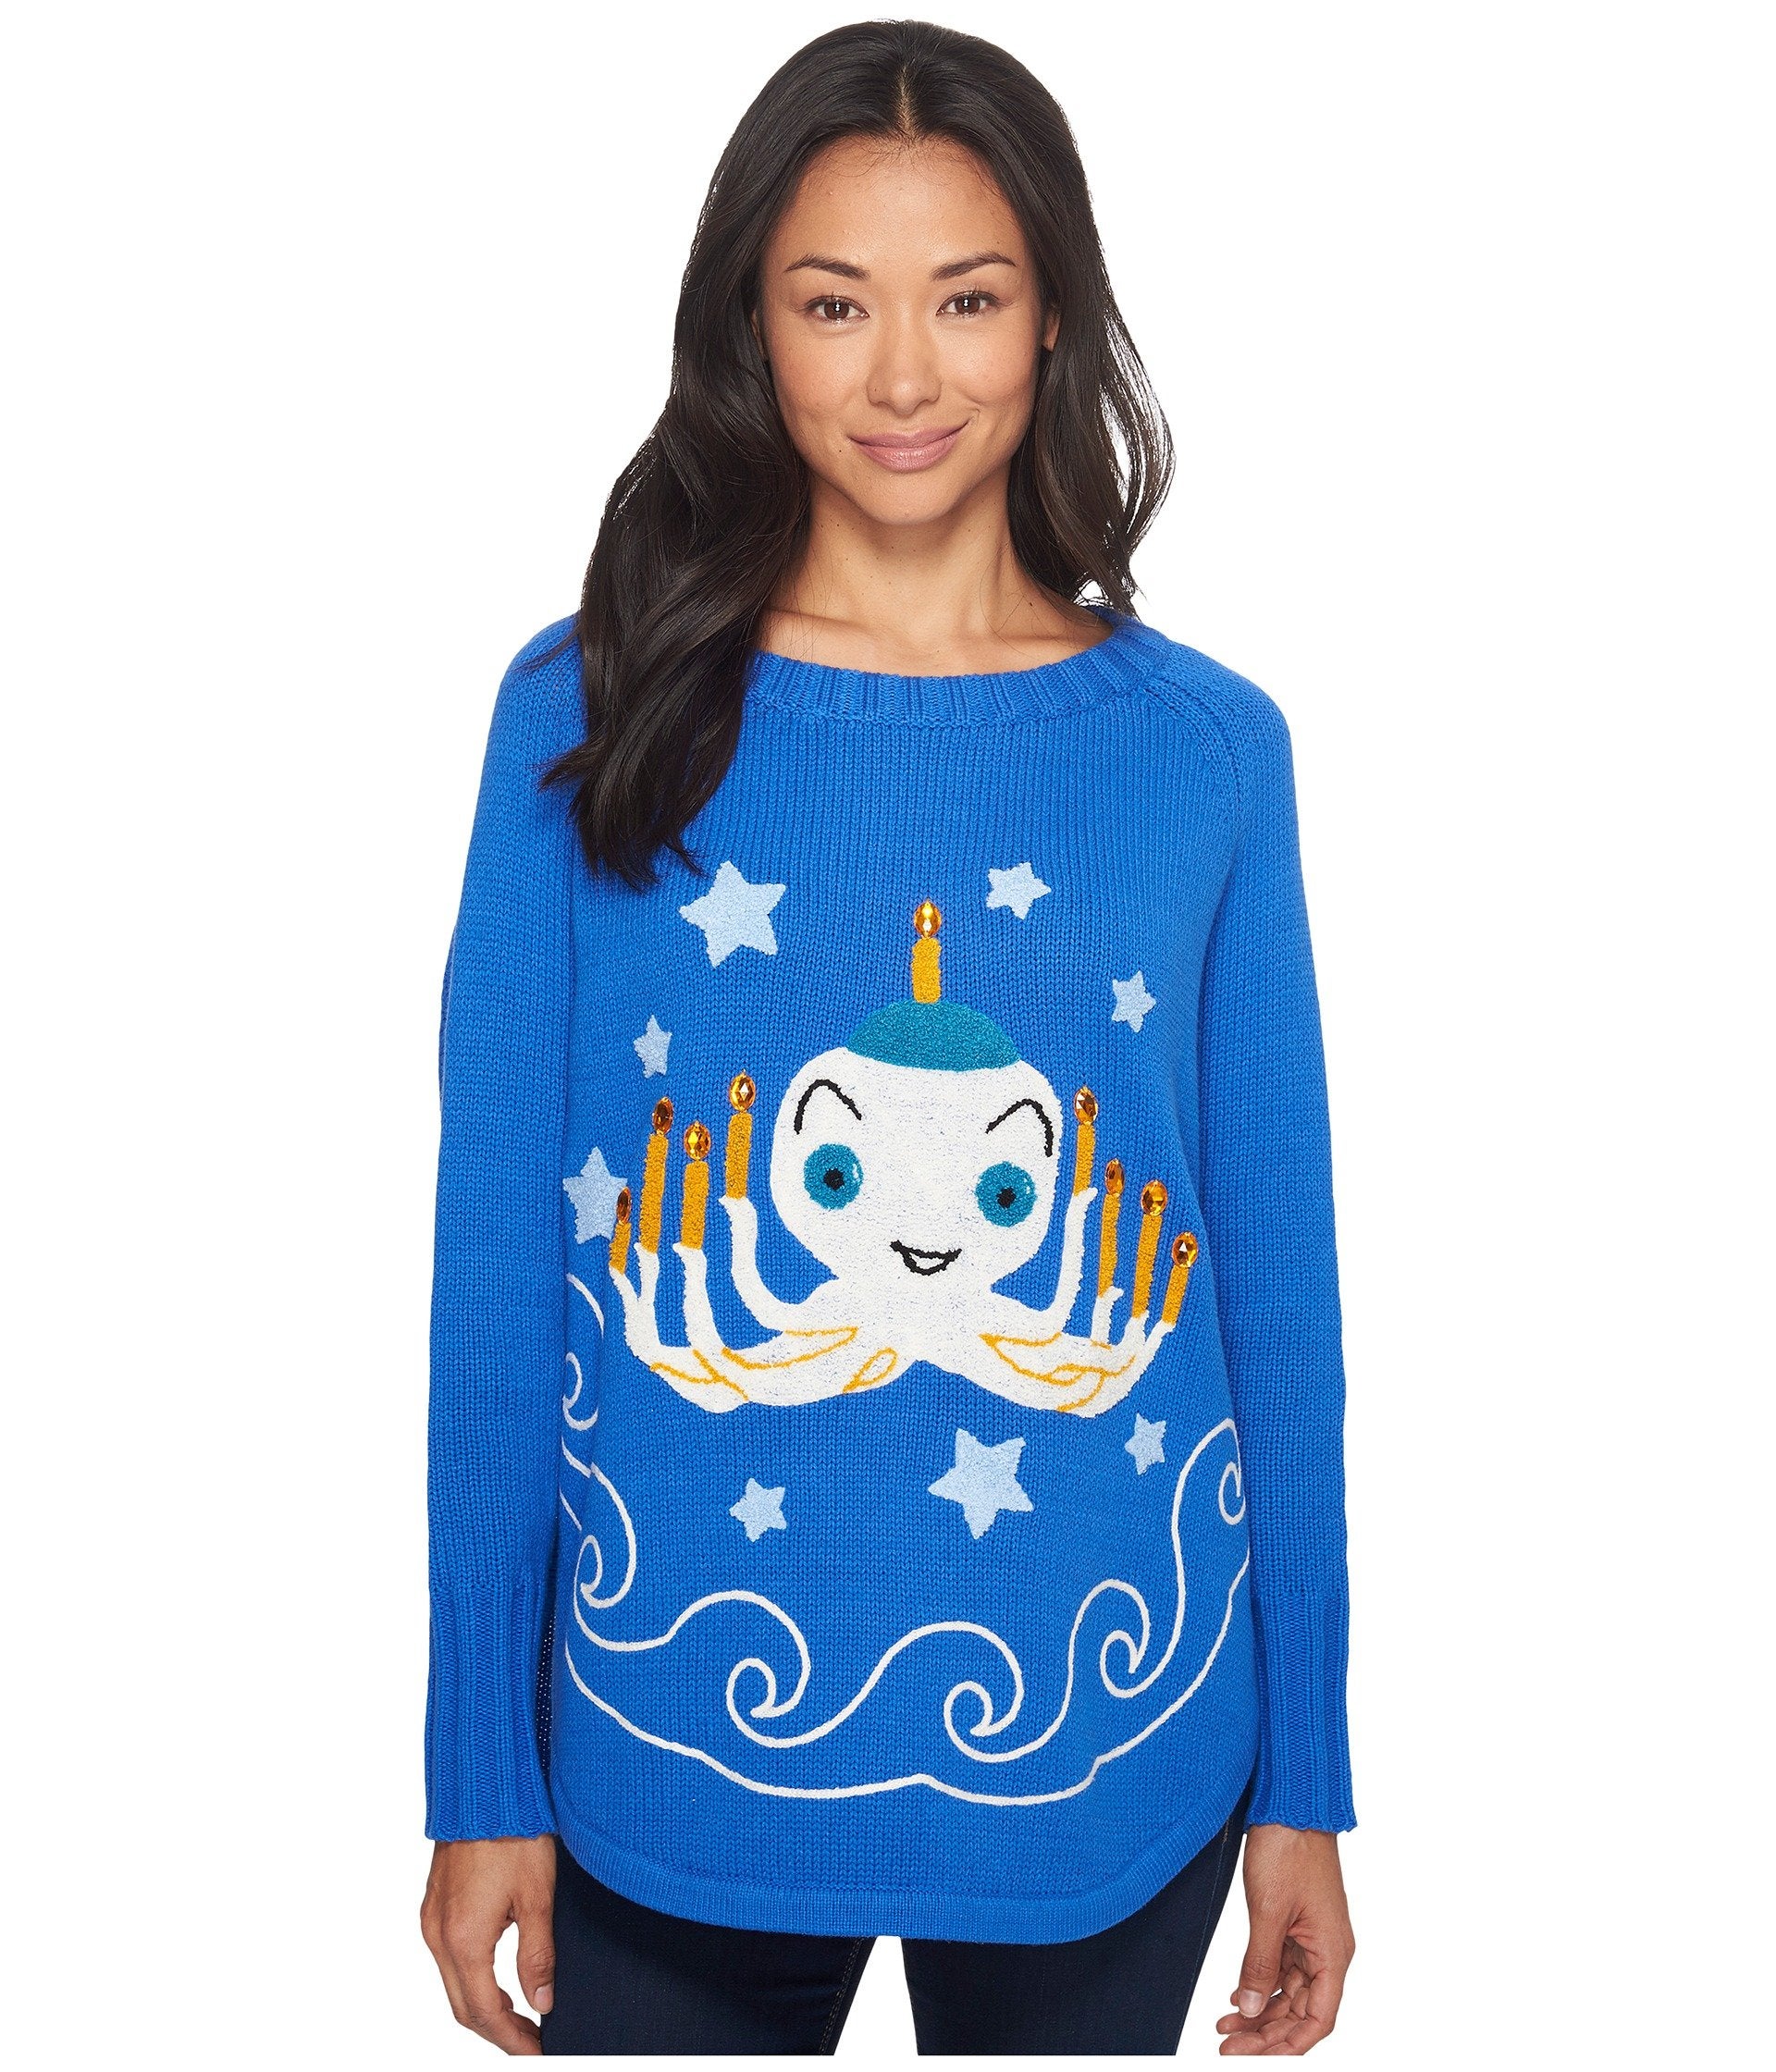 Guys, Whoopi Goldberg Makes The Best Christmas Sweaters, Seriously